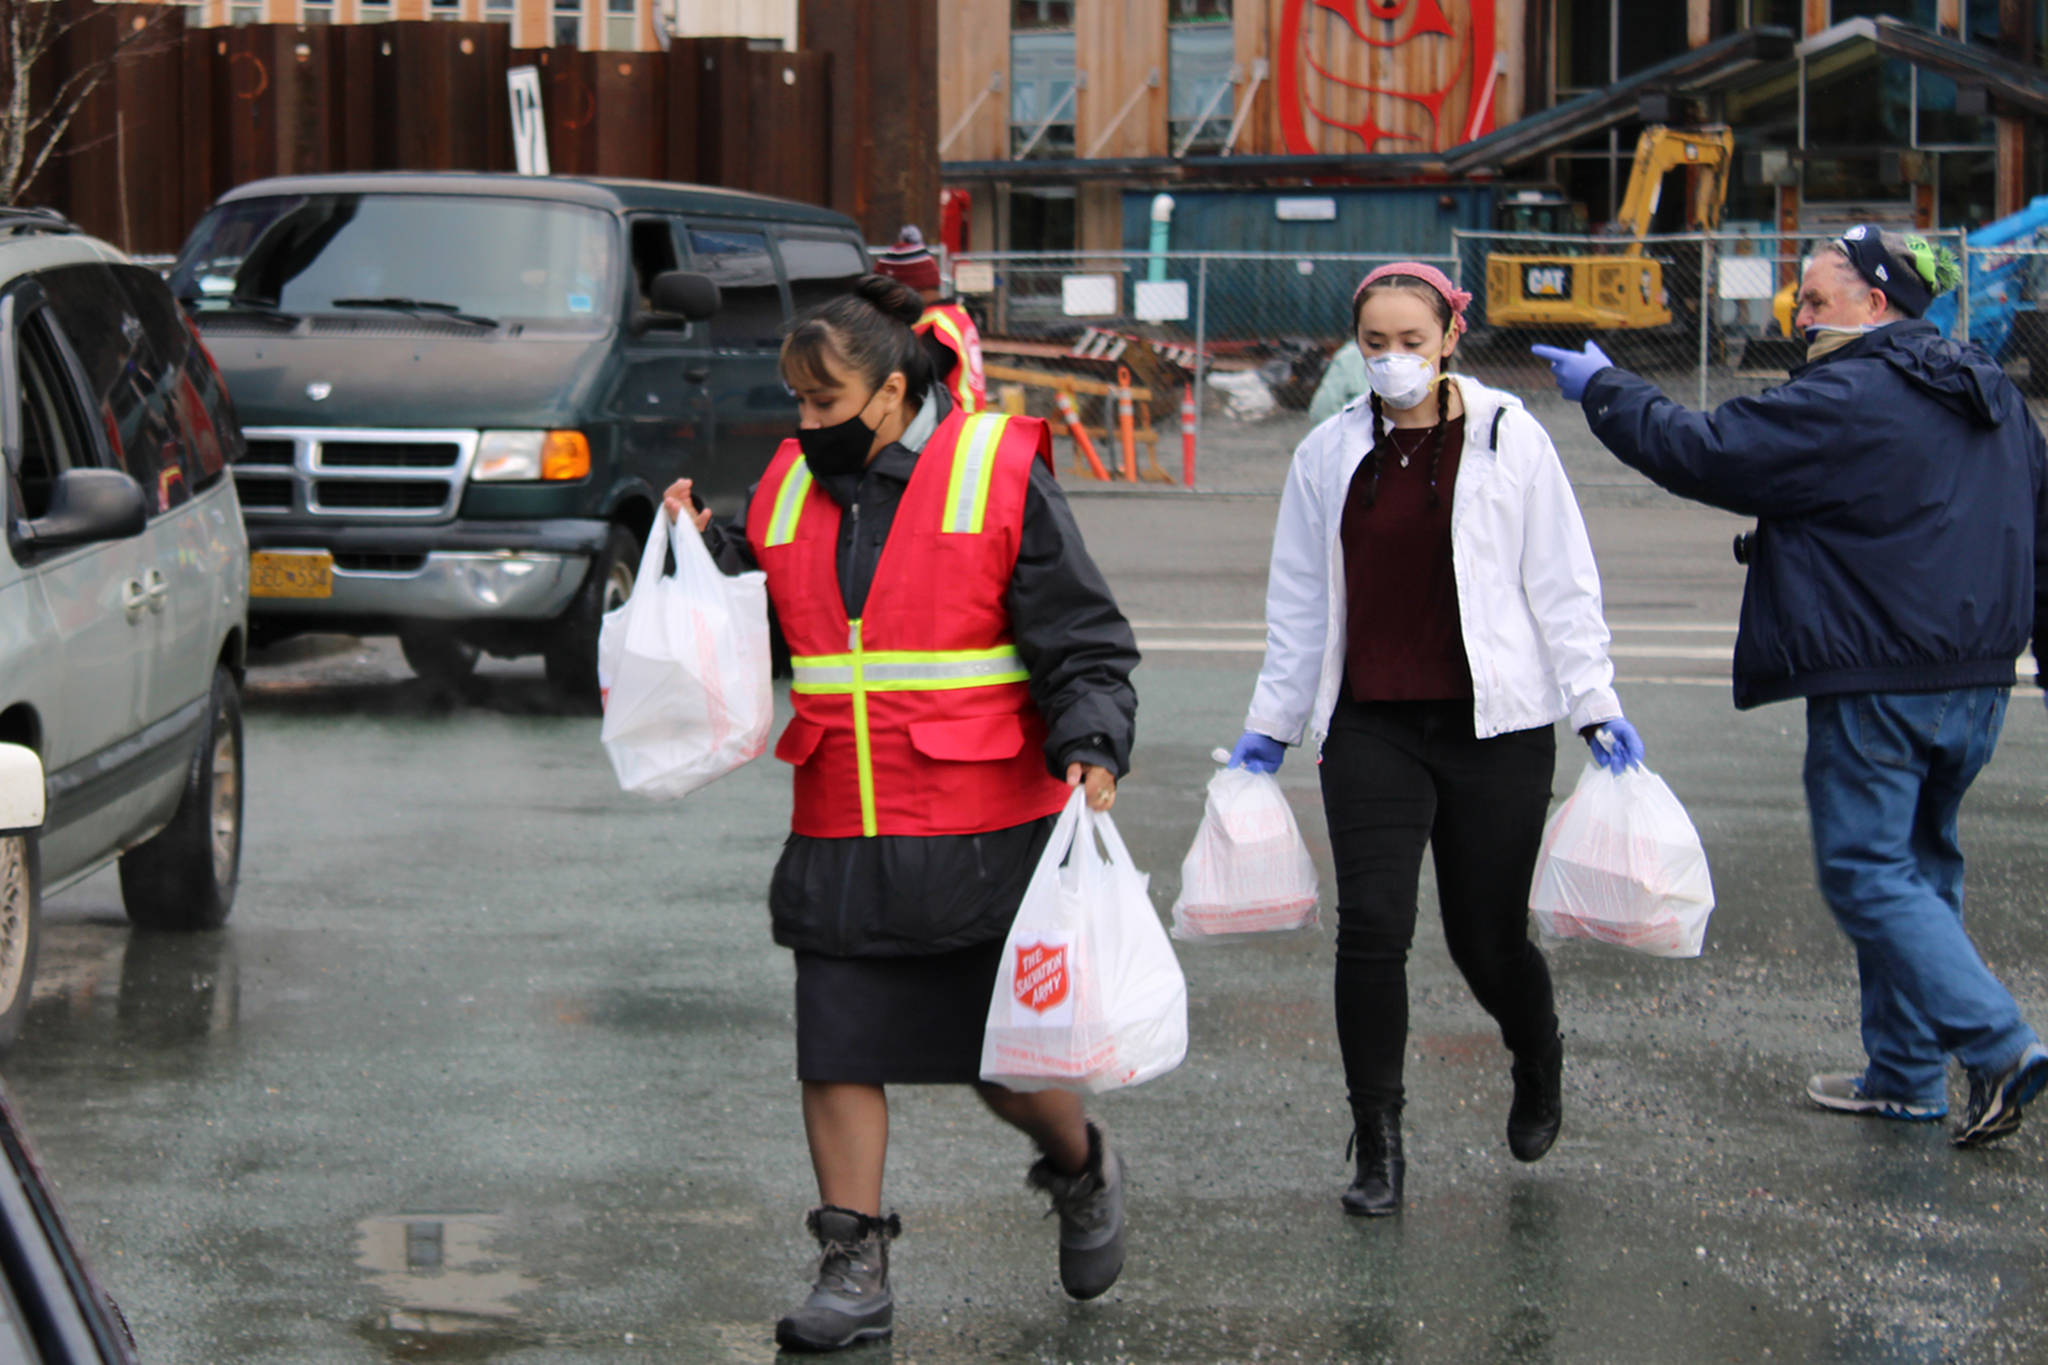 Salvation Army Officer Gina Halverson (left) and her daughter, Reilley Halverson (center), carry bags of meals to a waiting vehicle. Kirk Stagg (right) helps direct vehicles at the Downtown Transit Center on Thursday, Nov. 26. (Ben Hohenstatt / Juneau Empire)